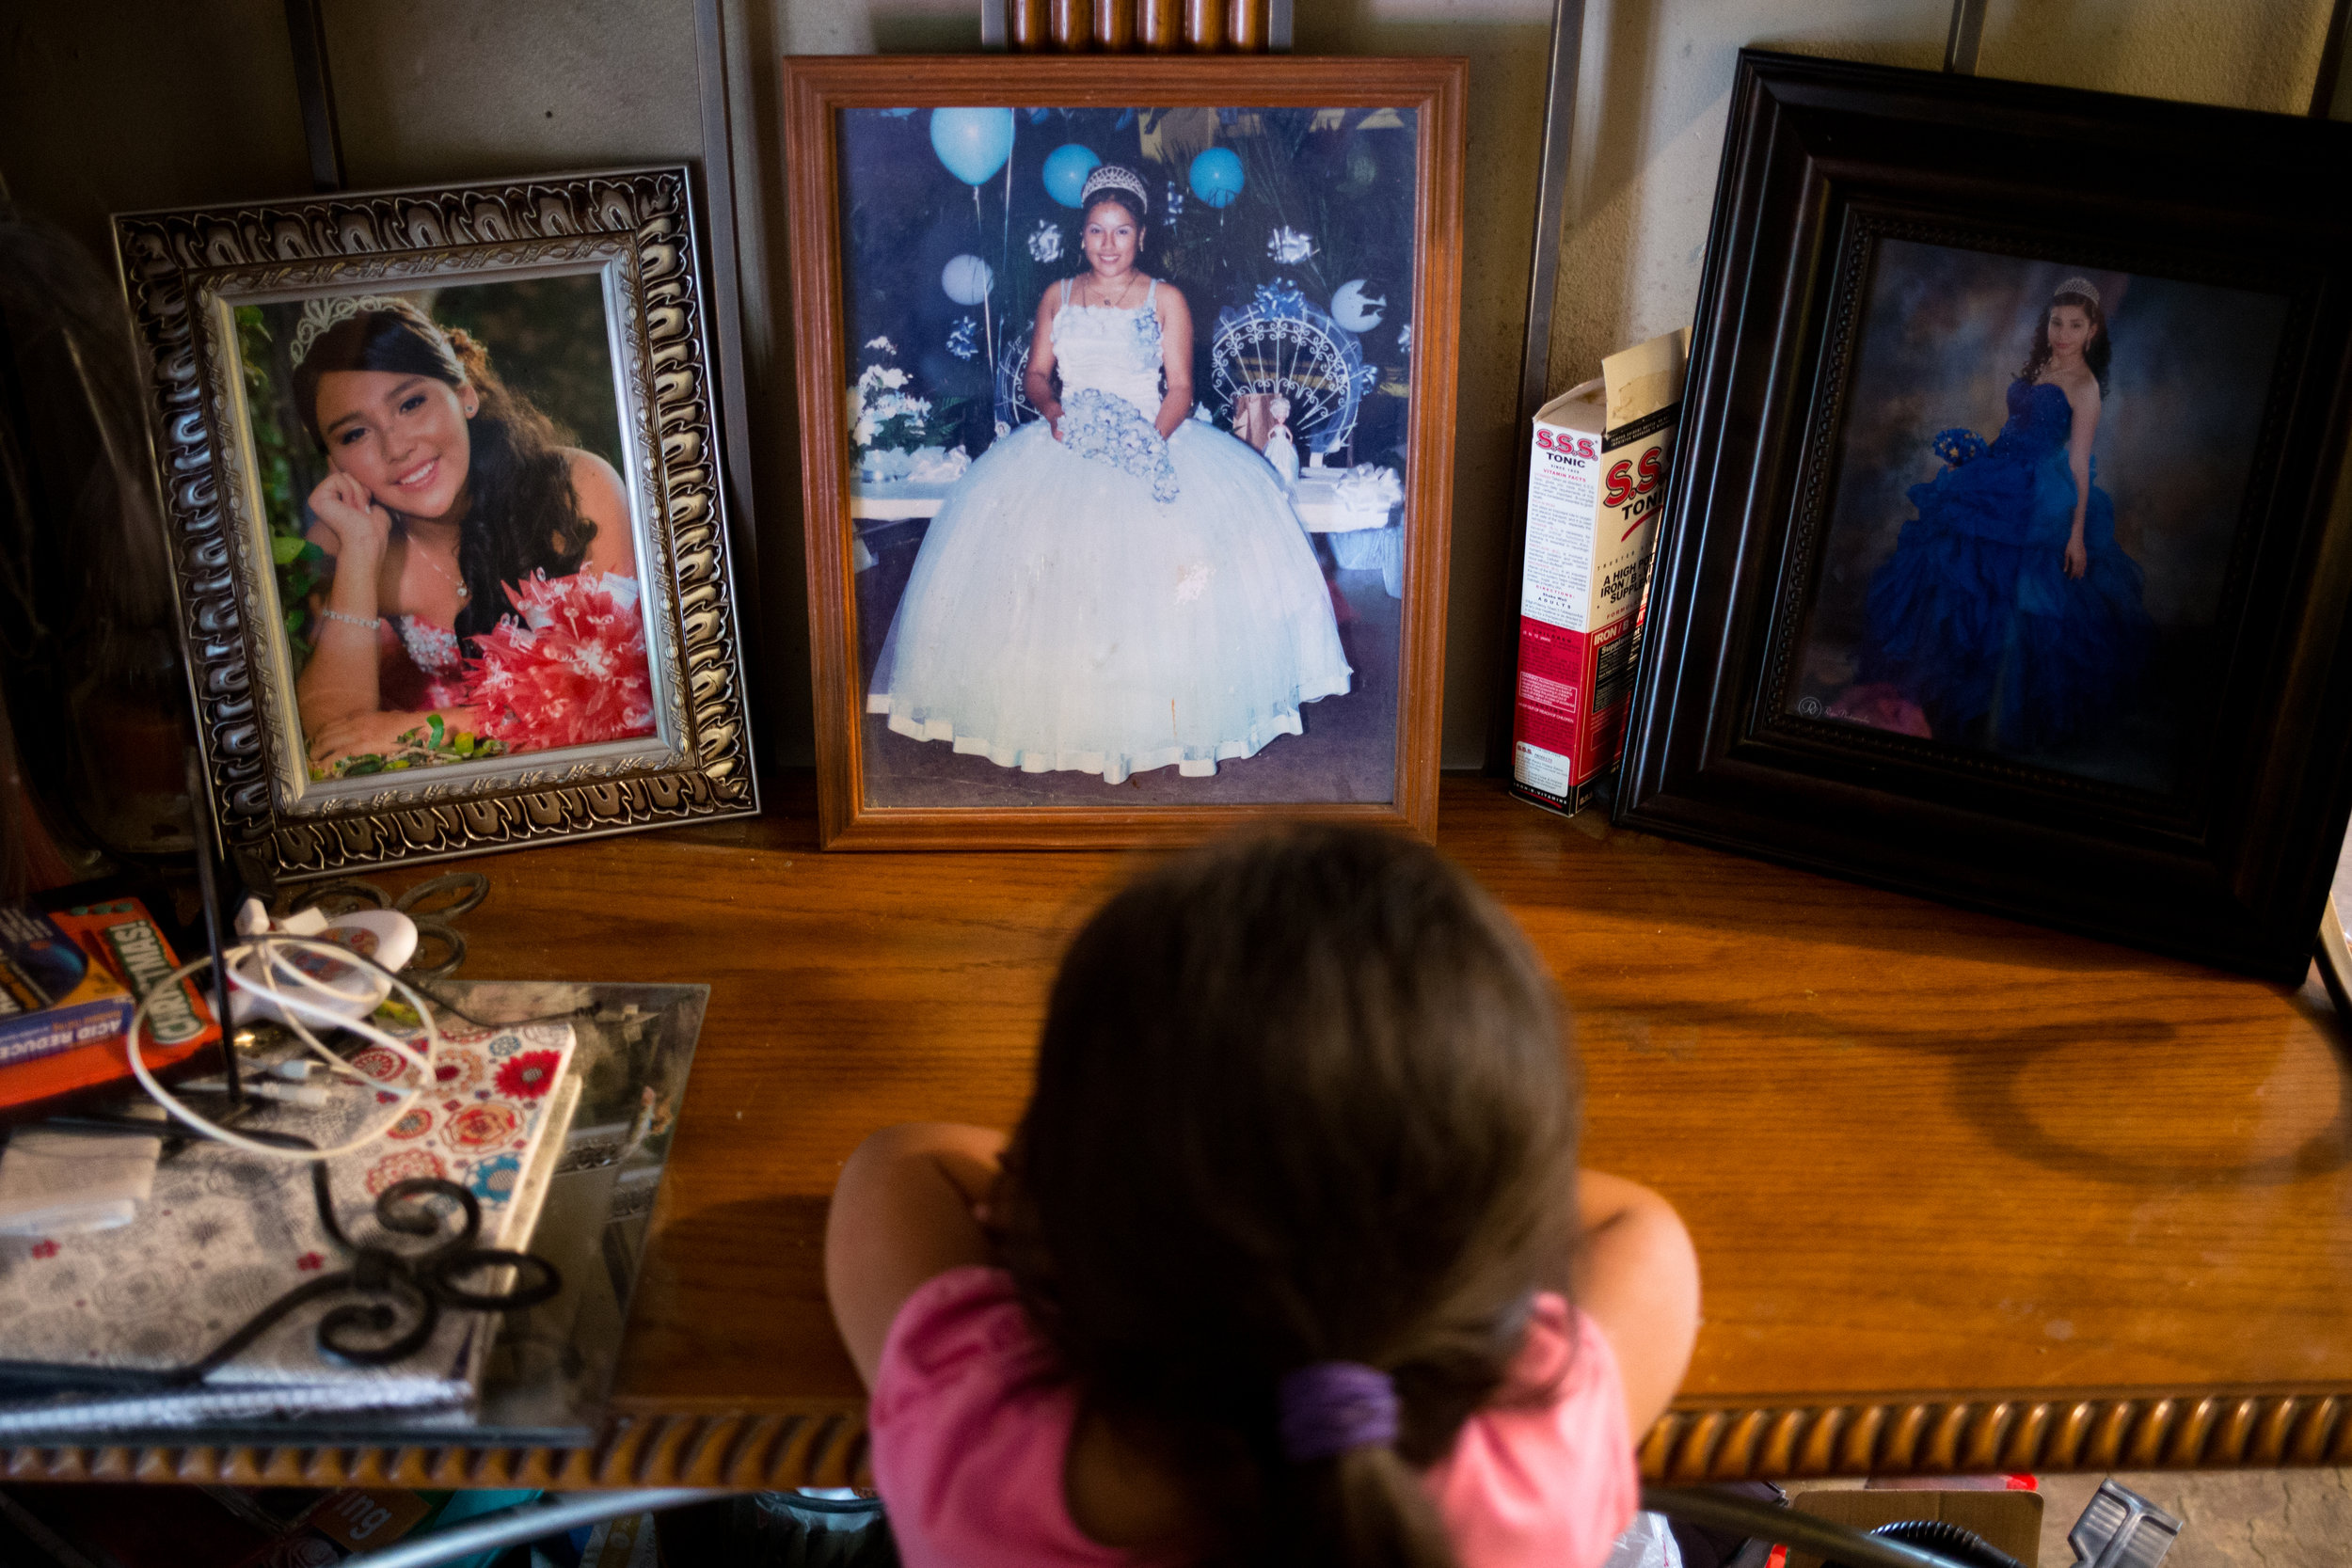  Ashlee, 4, looks at photos of her mother and other female relatives at their quinceañeras, a fifteenth&nbsp;birthday celebration commonly celebrated among Mexicans and Mexican-Americans along the border. Ashlee's mother works&nbsp;as a full-time med